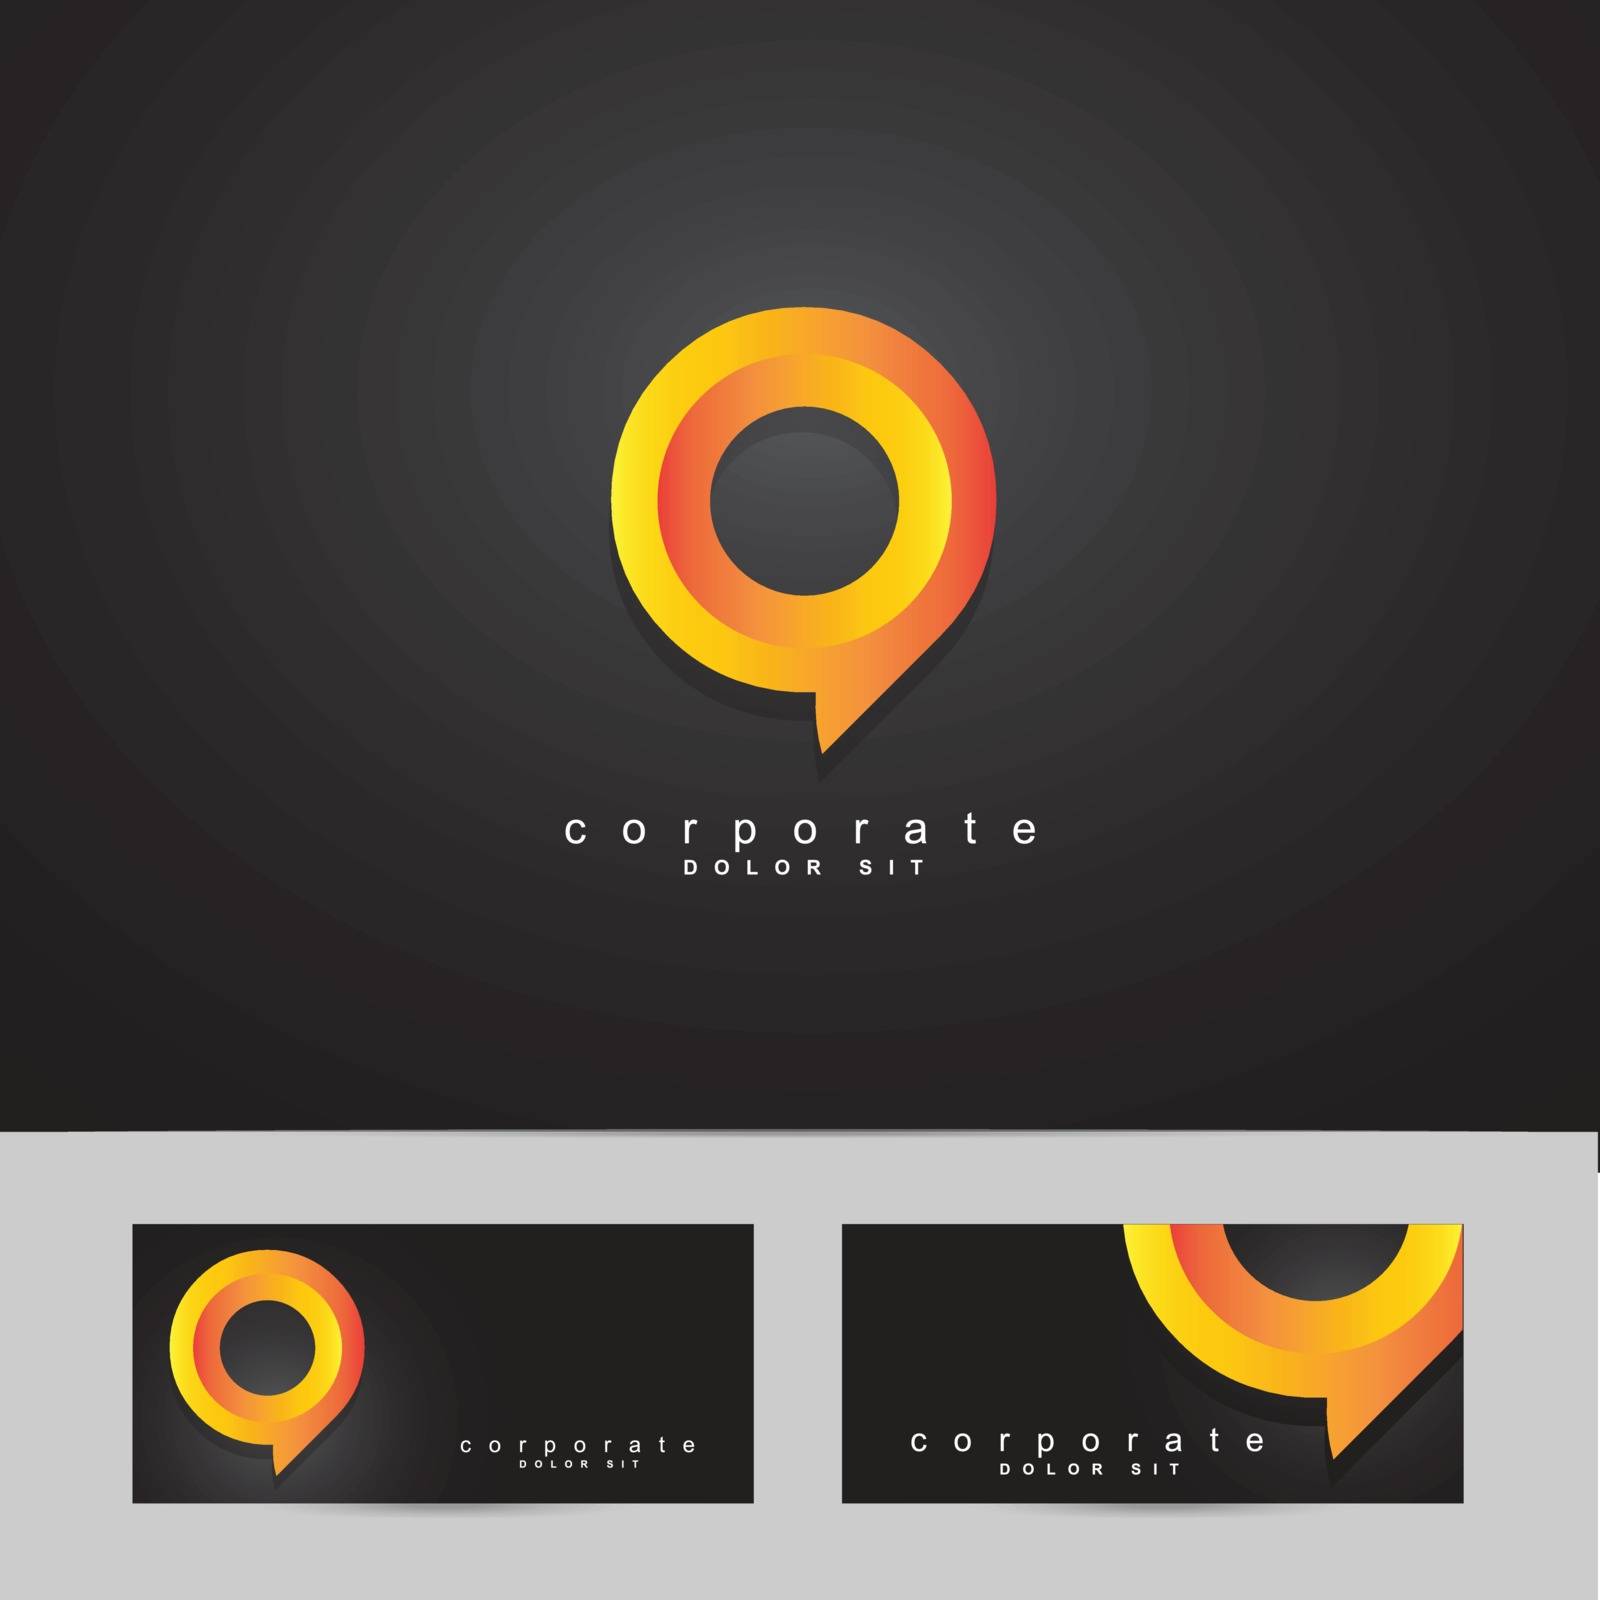 Logo vector template of a corporate or business symbol